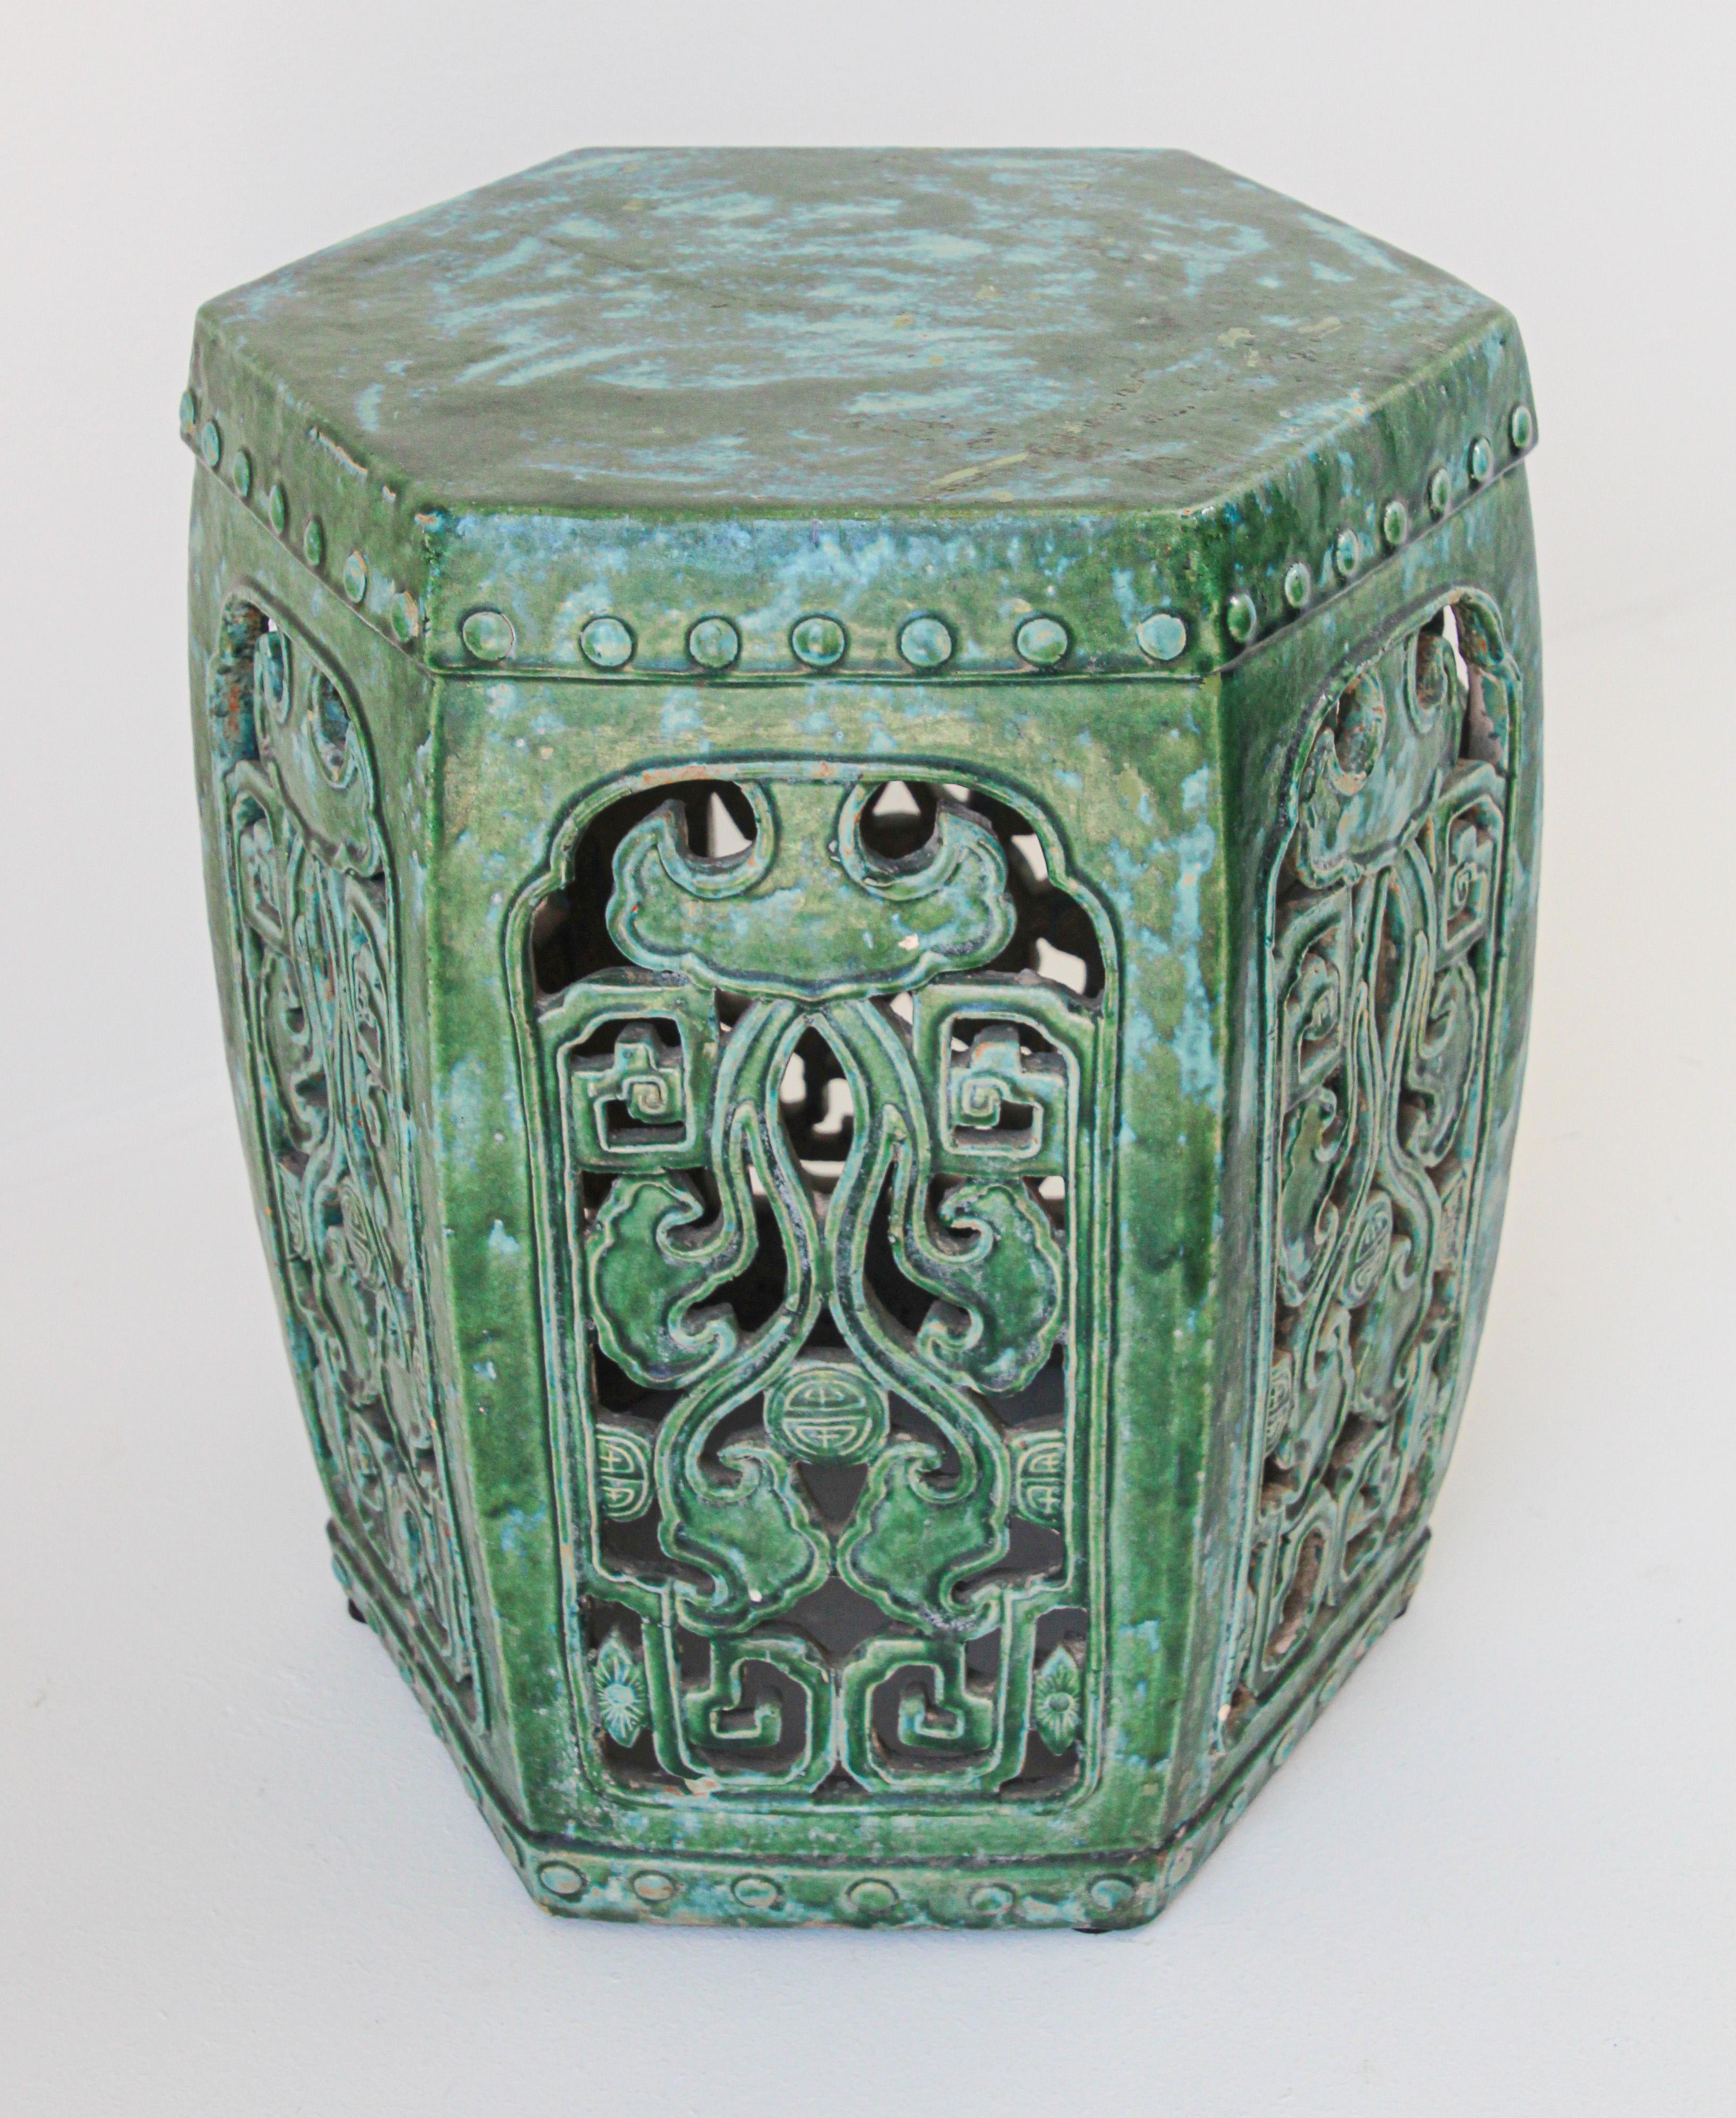 Large emerald green large Chinese ceramic garden stool.
Nicely carved on each sides with Fen Shui designs and foliages with raised dots around top.
Chinese export emerald green ceramic glaze stool great to use indoor or outdoor as a stool, end